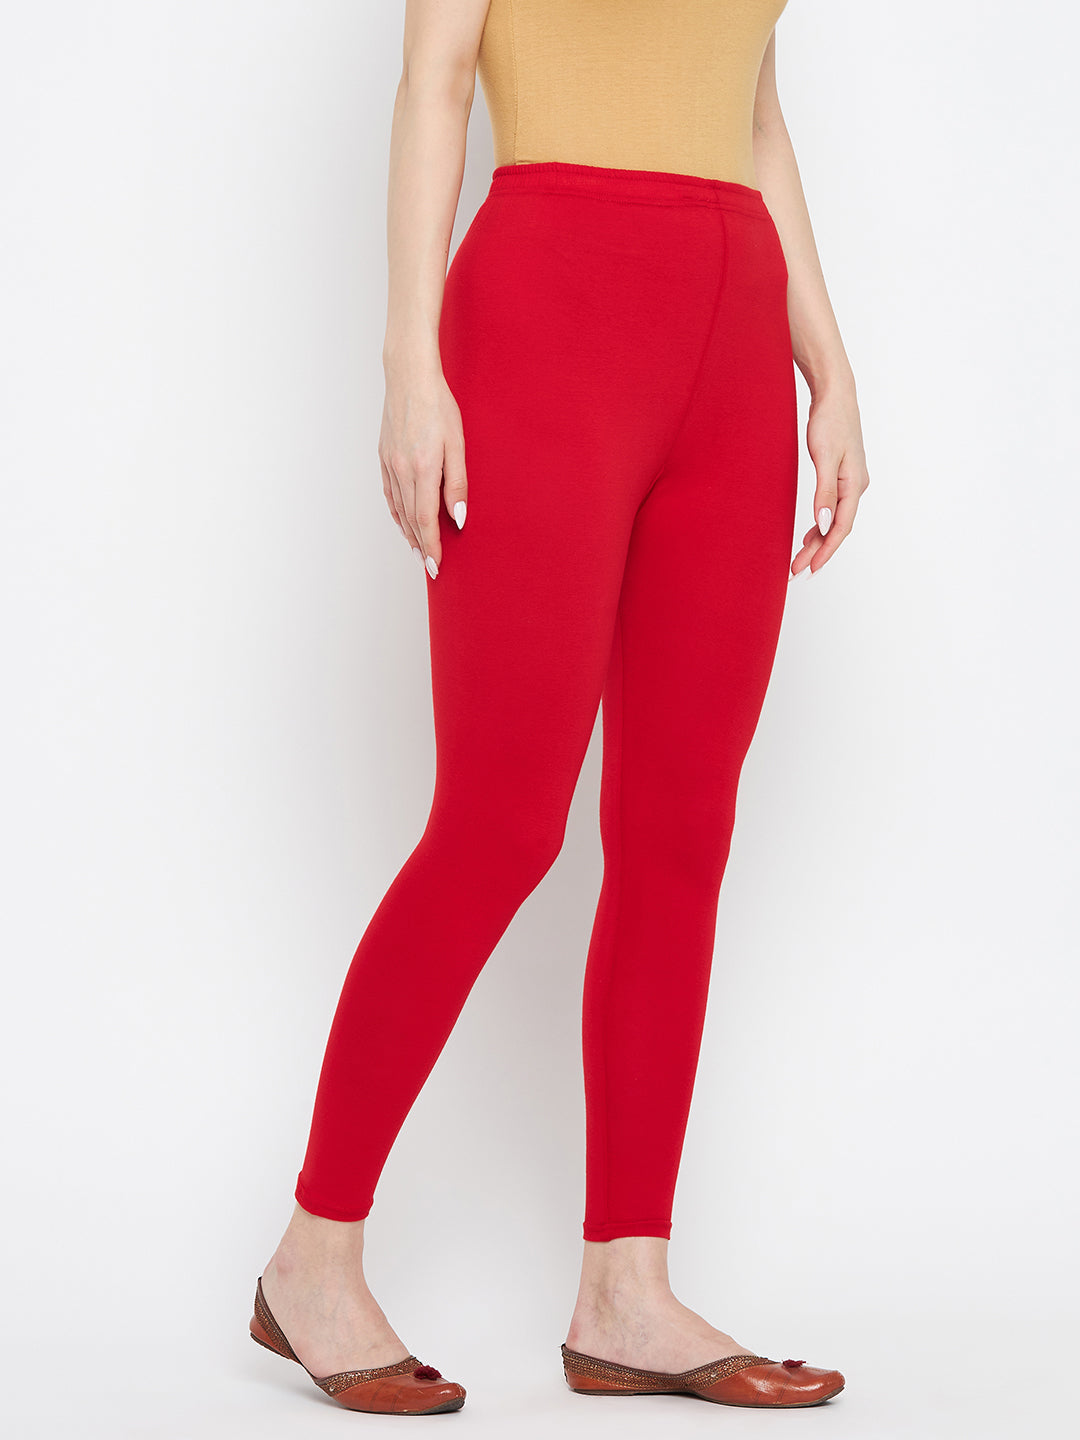 Red-Solid-Ankle-Length-Leggings-CC42720